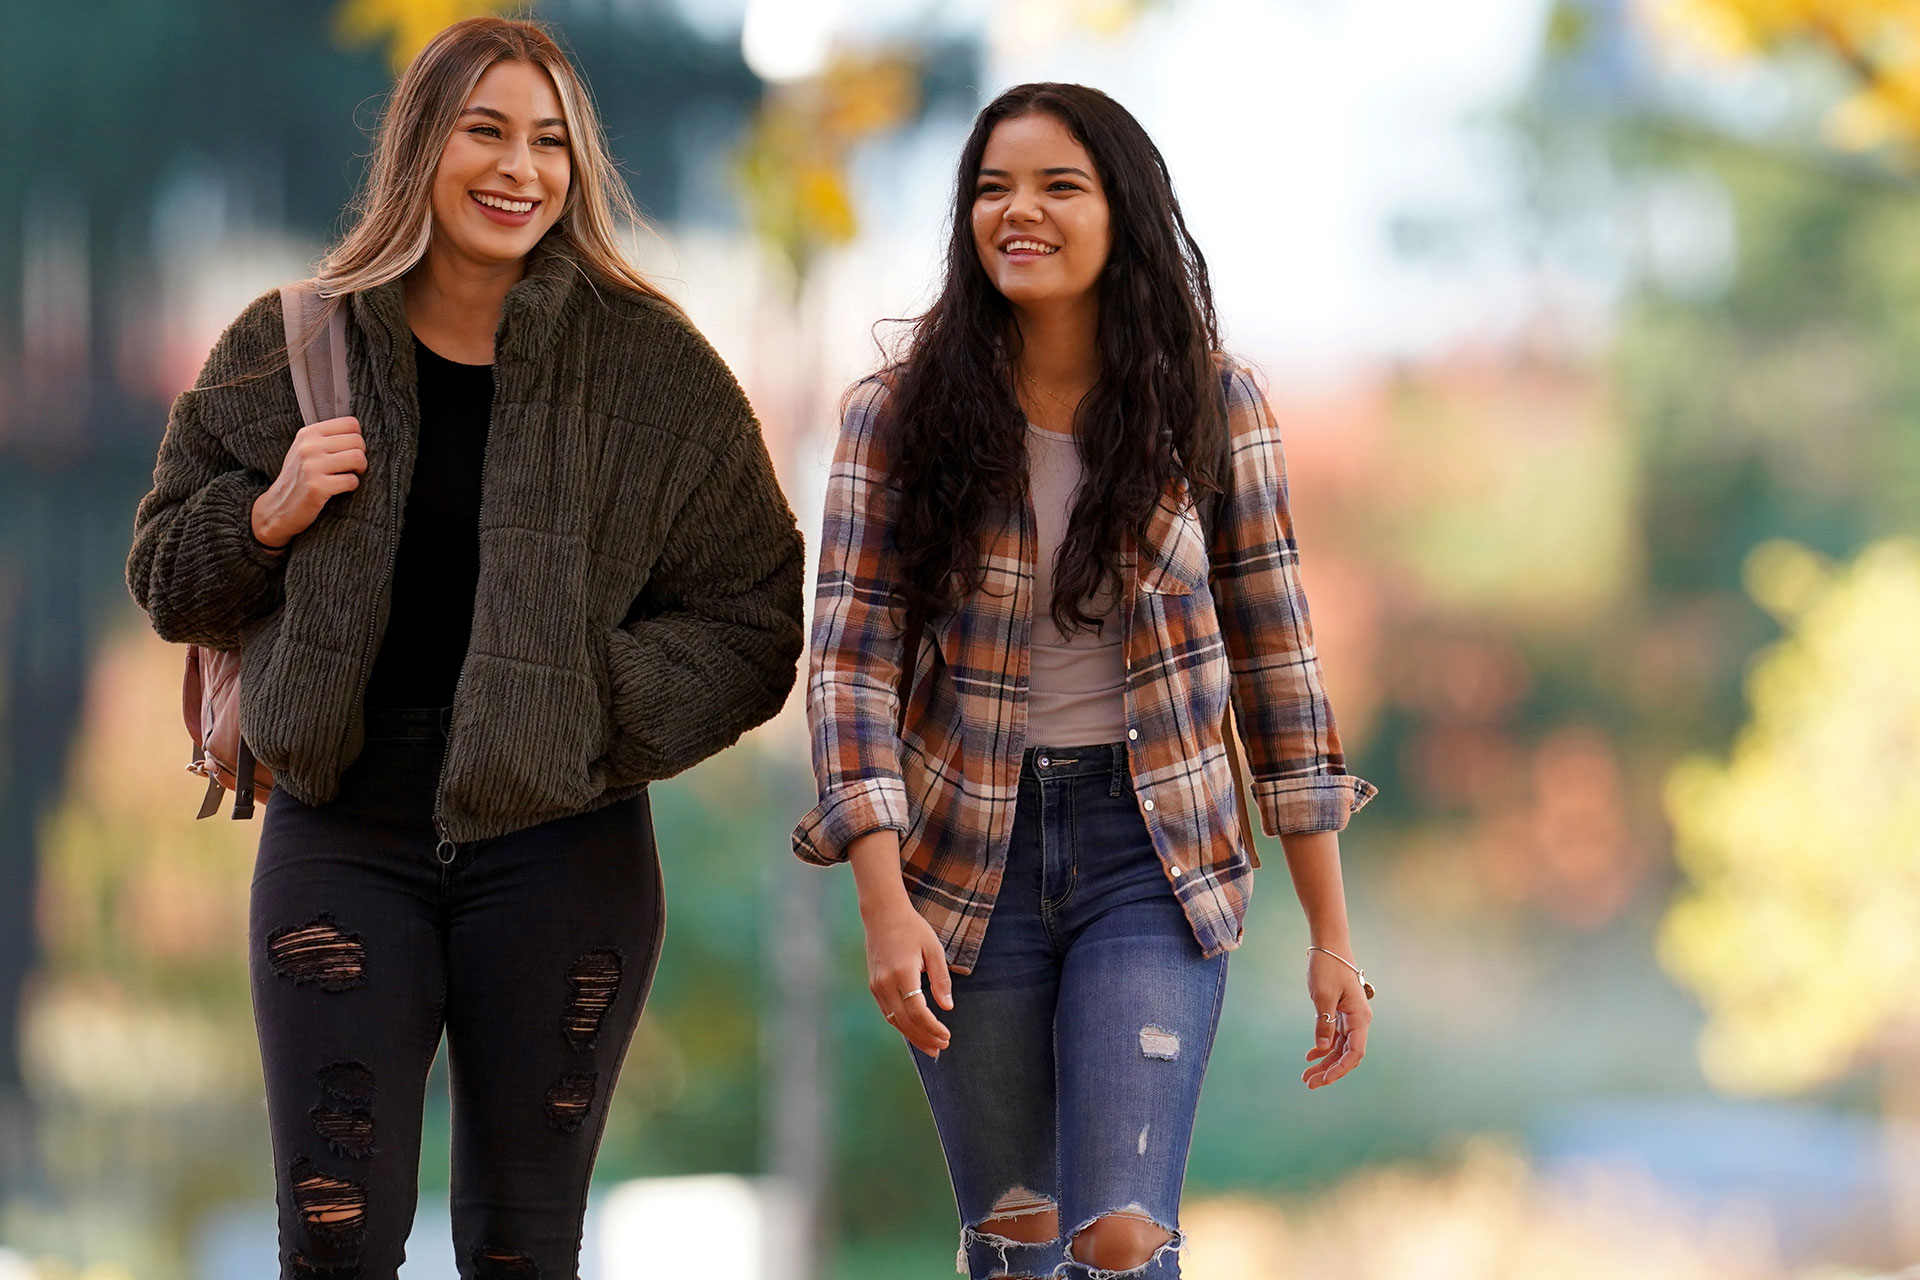 Students walking on campus during the fall Photo